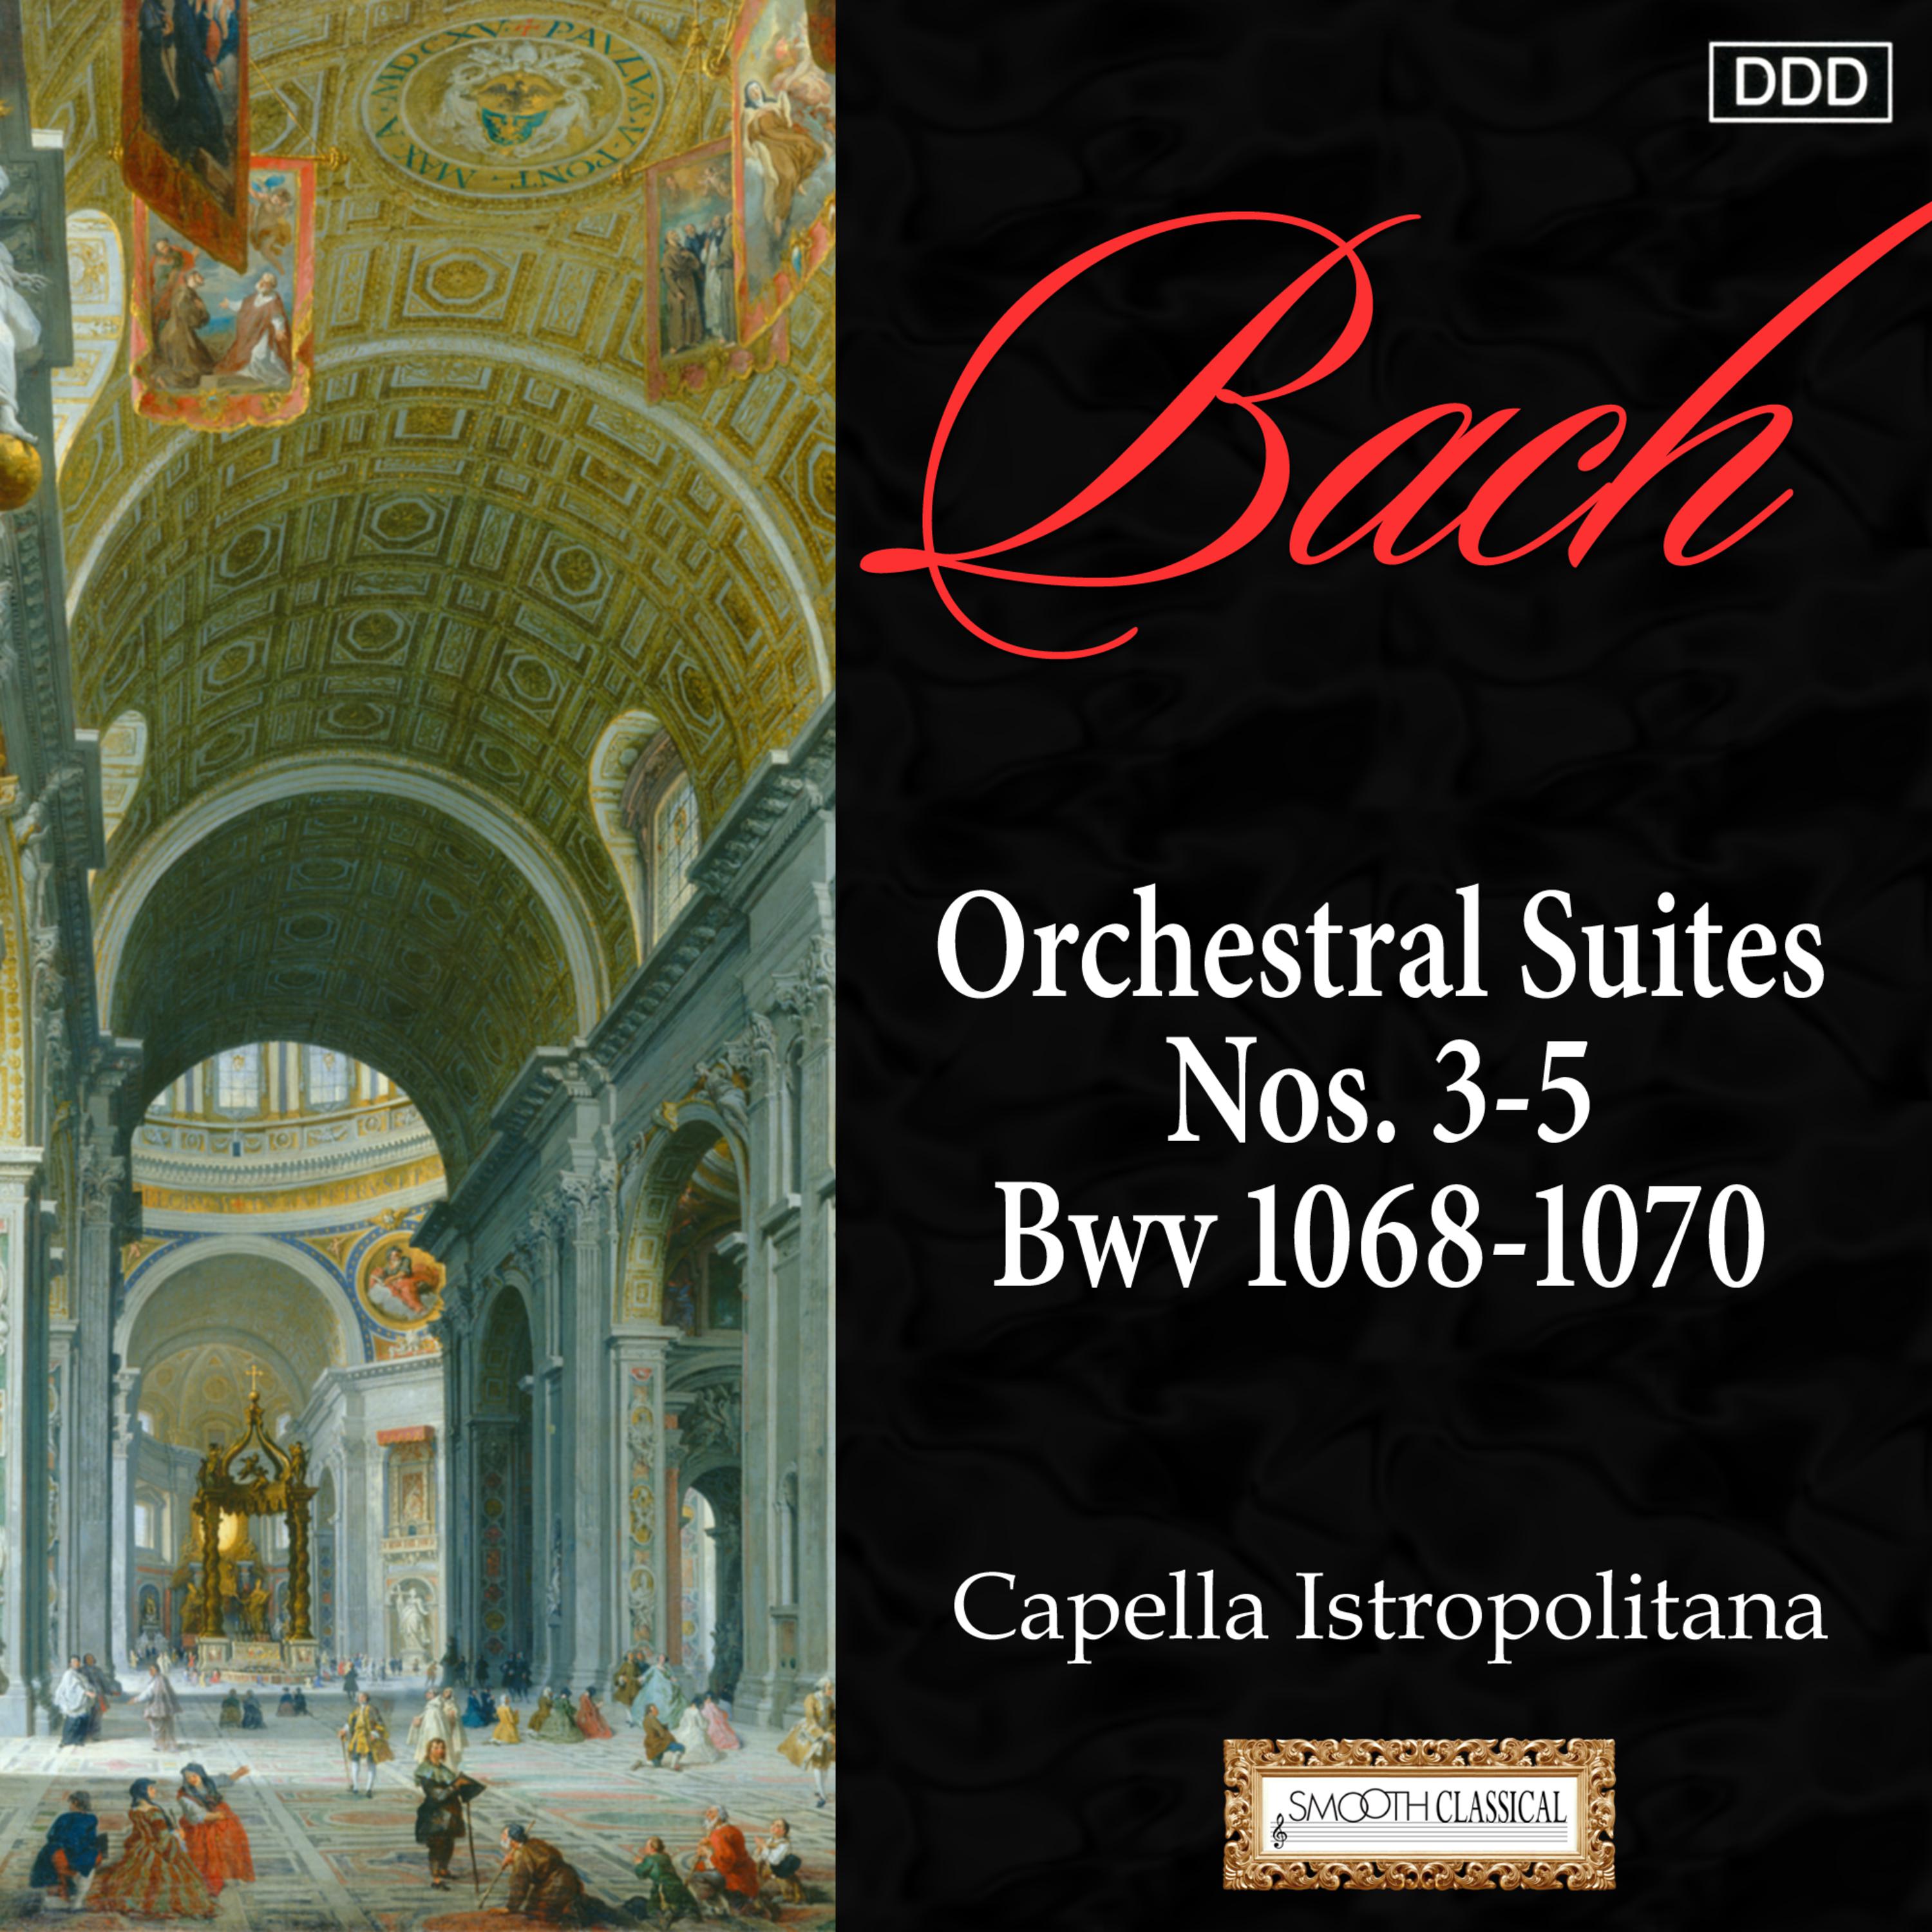 Orchestral Suite No. 3 in D Major, BWV 1068: III. Gavotte I and II